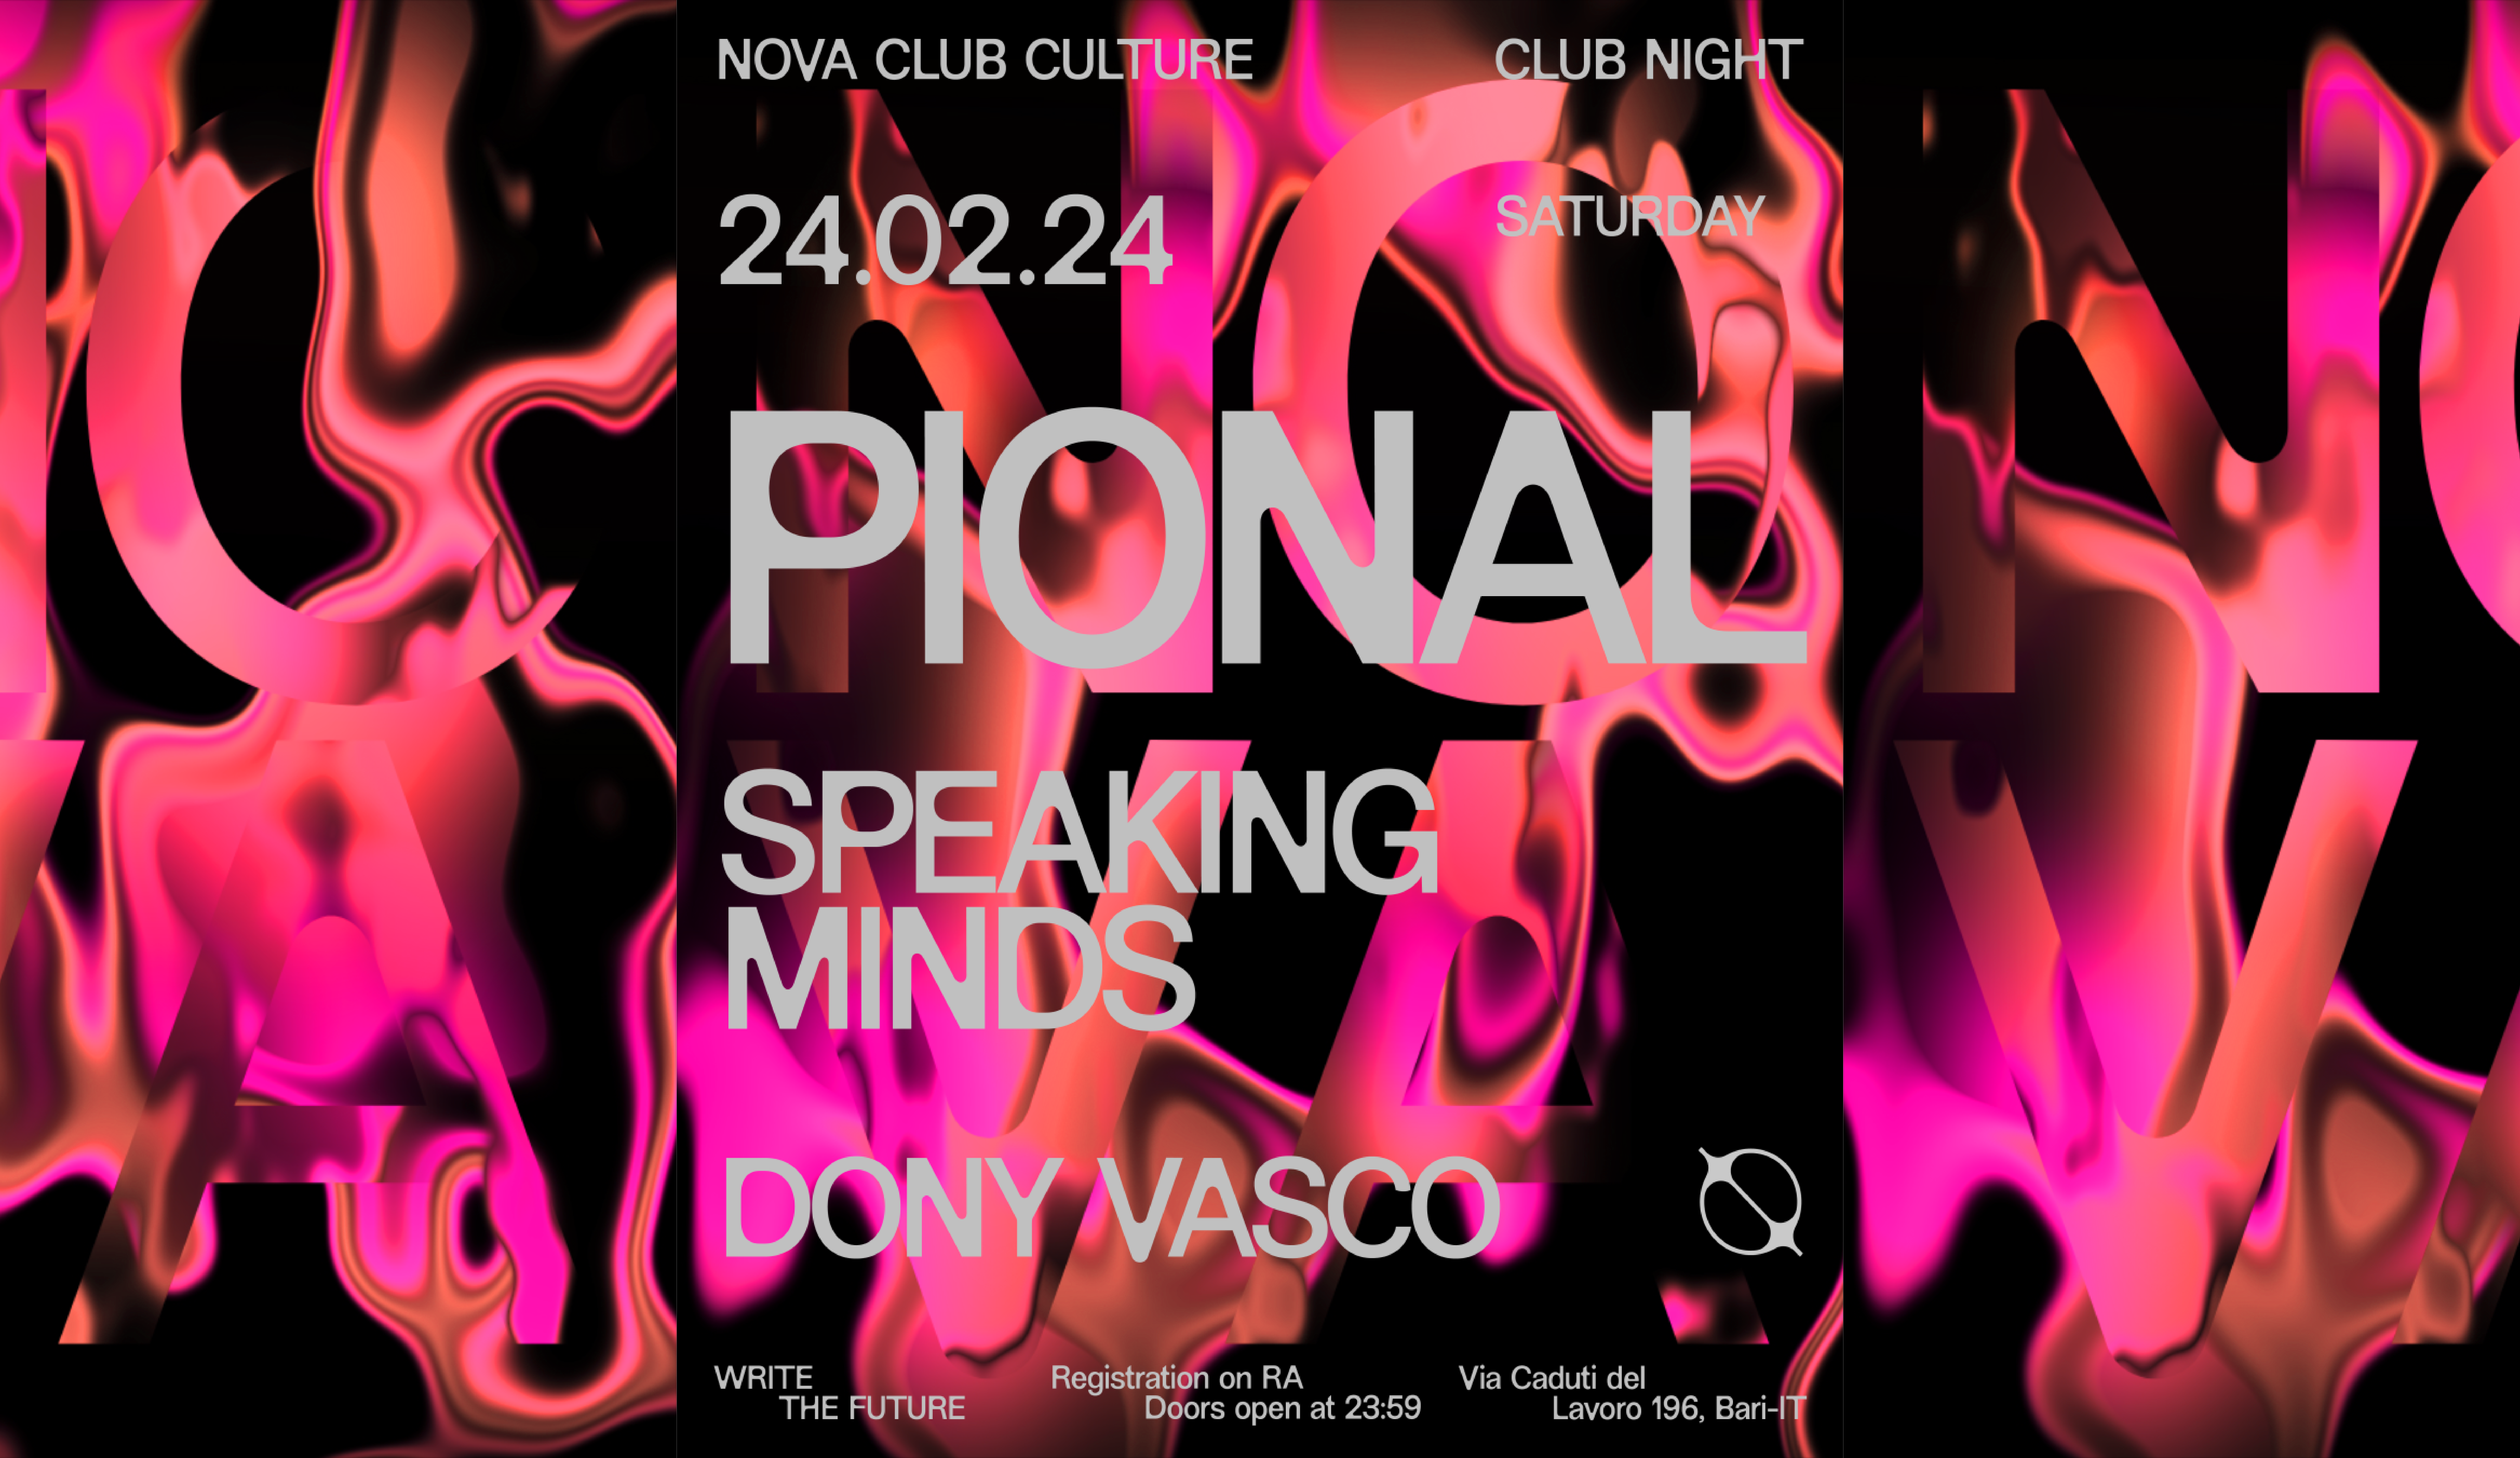 CLUB NIGHT with Pional - Speaking Minds - フライヤー表